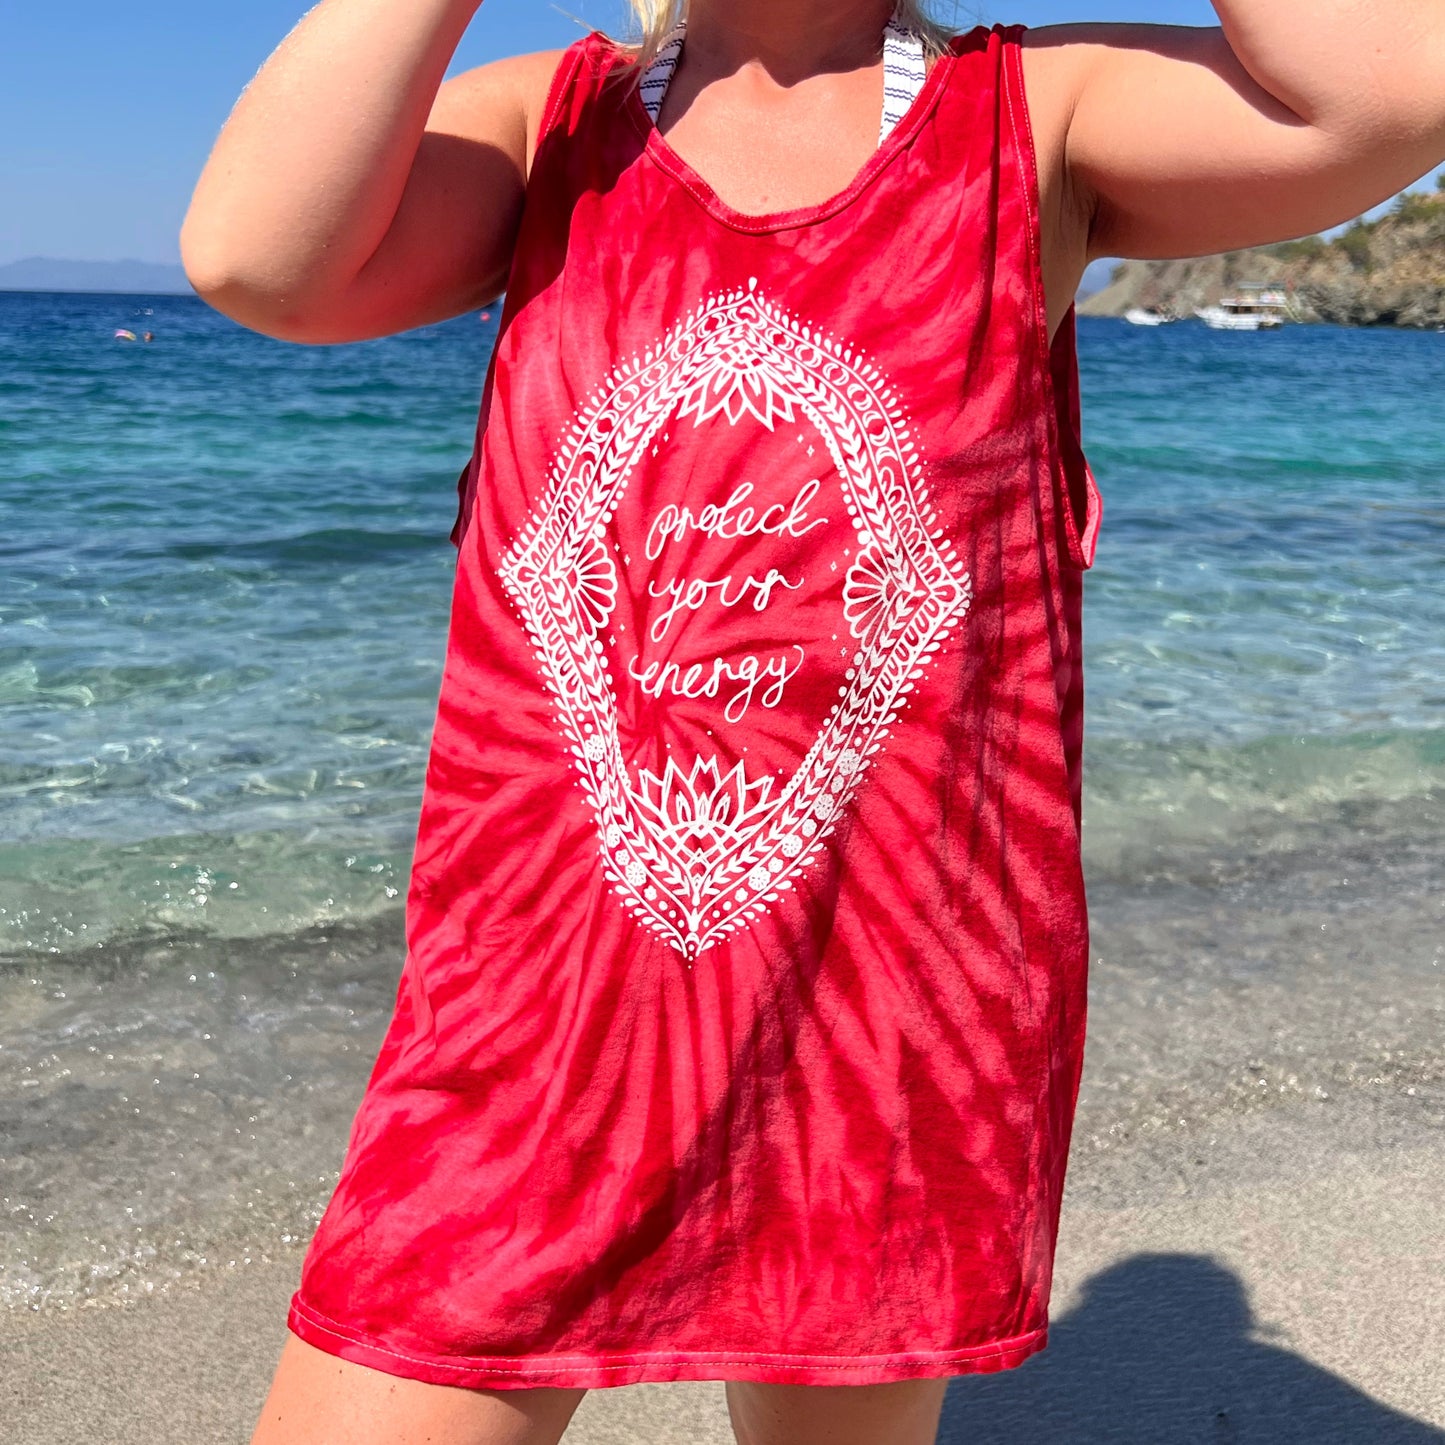 protect your energy tie dye vest top - red